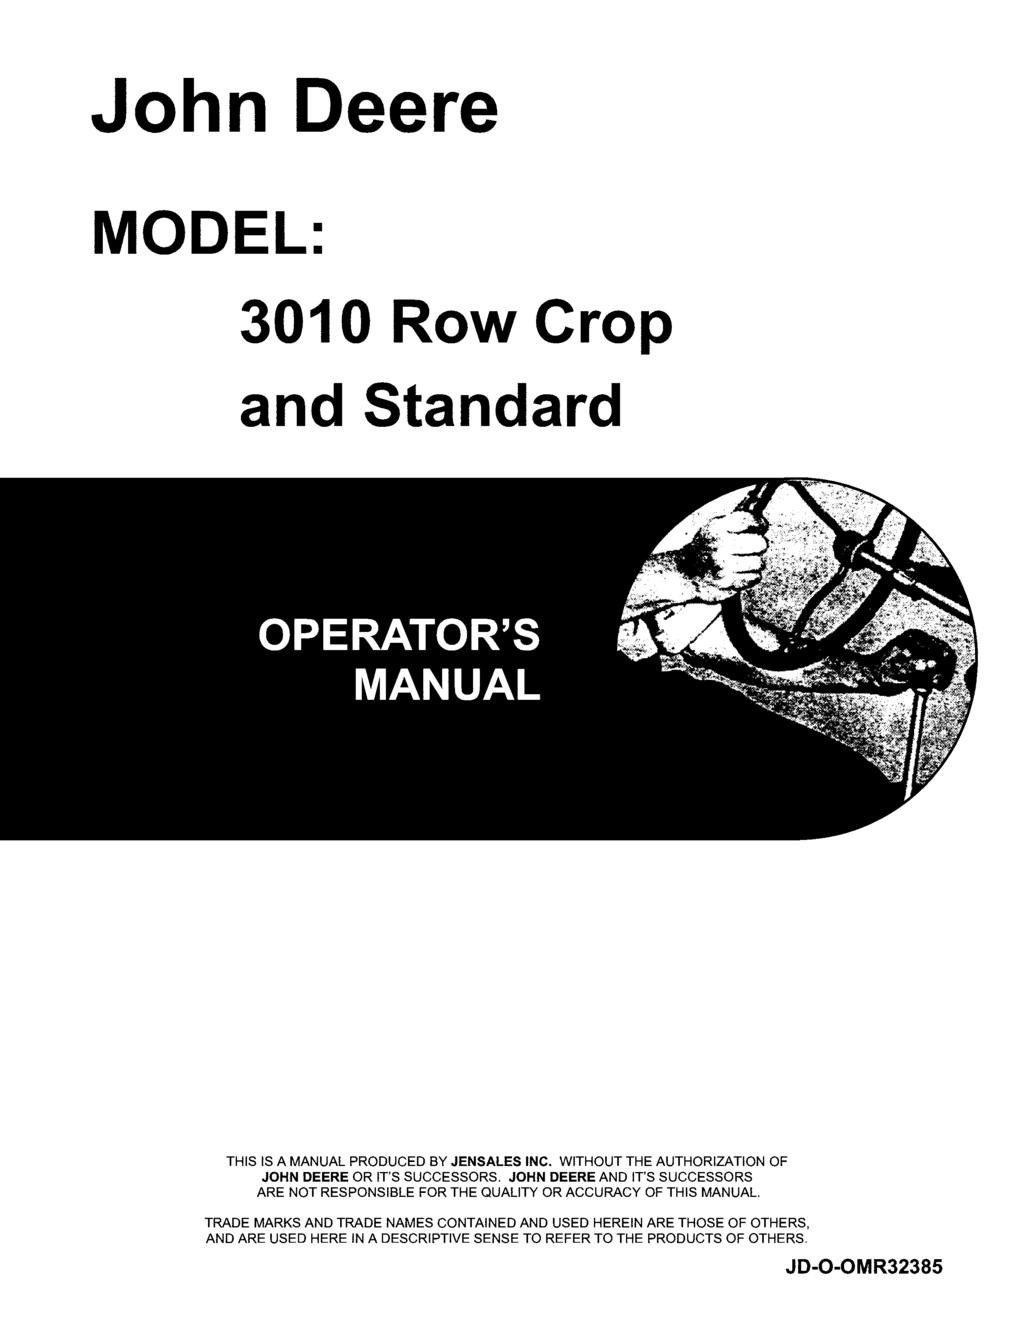 John Deere MODEL: 301 0 Row Crop and Standard THIS IS A MANUAL PRODUCED BY JENSALES INC. WITHOUT THE AUTHORIZATION OF JOHN DEERE OR IT'S SUCCESSORS.